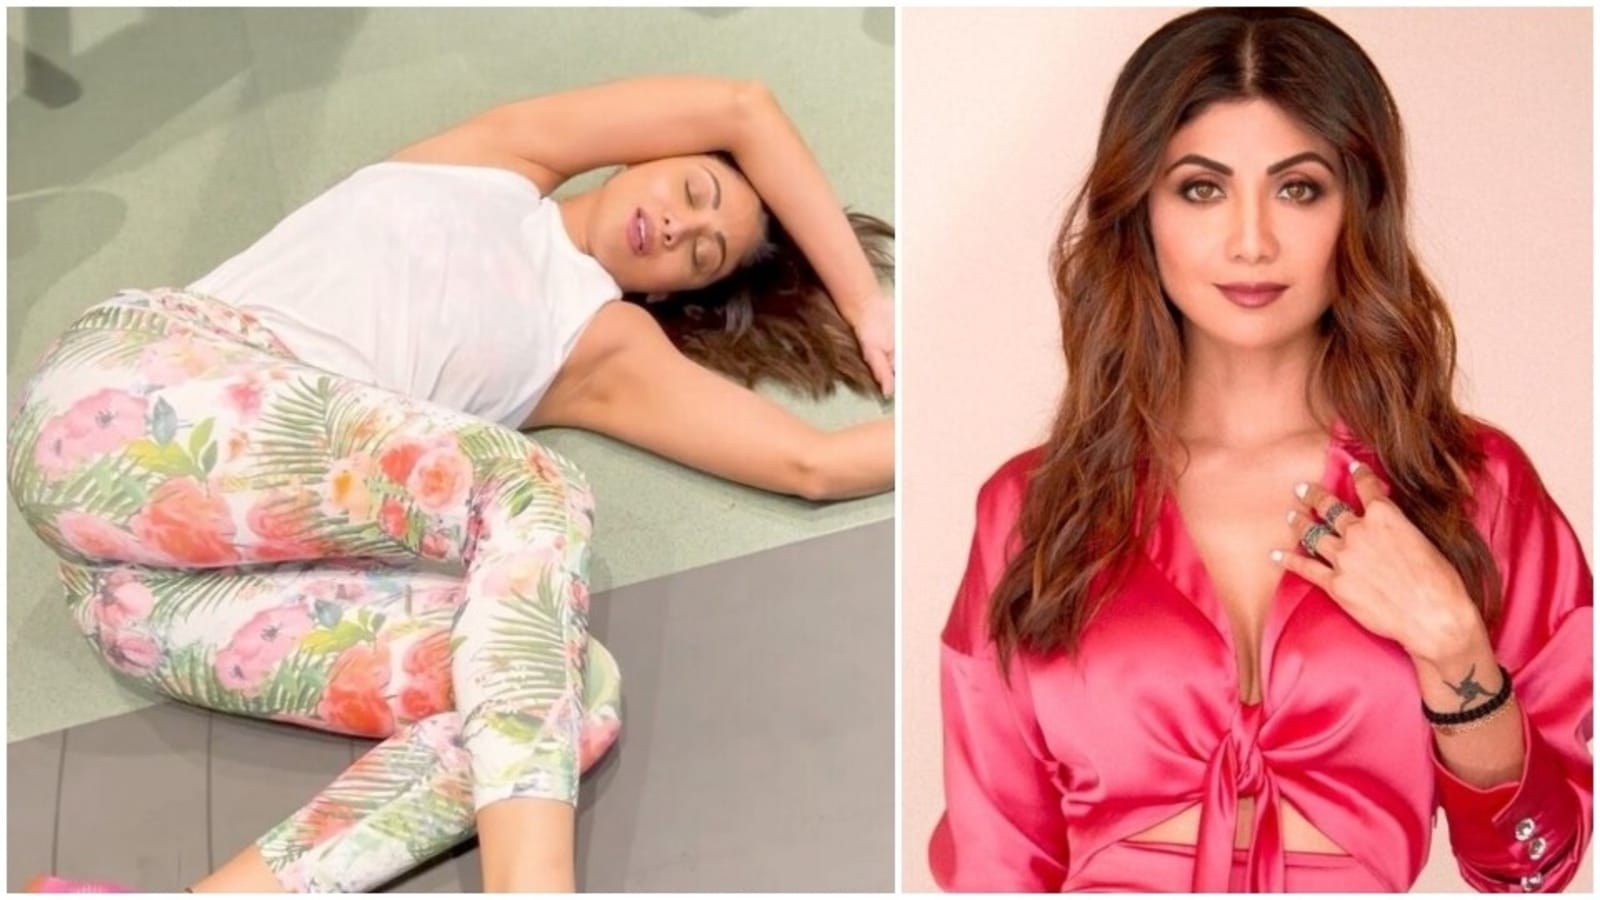 Shilpa Xxx - Shilpa Shetty passes out after tough workout in funny post-gym video: Watch  | Health - Hindustan Times